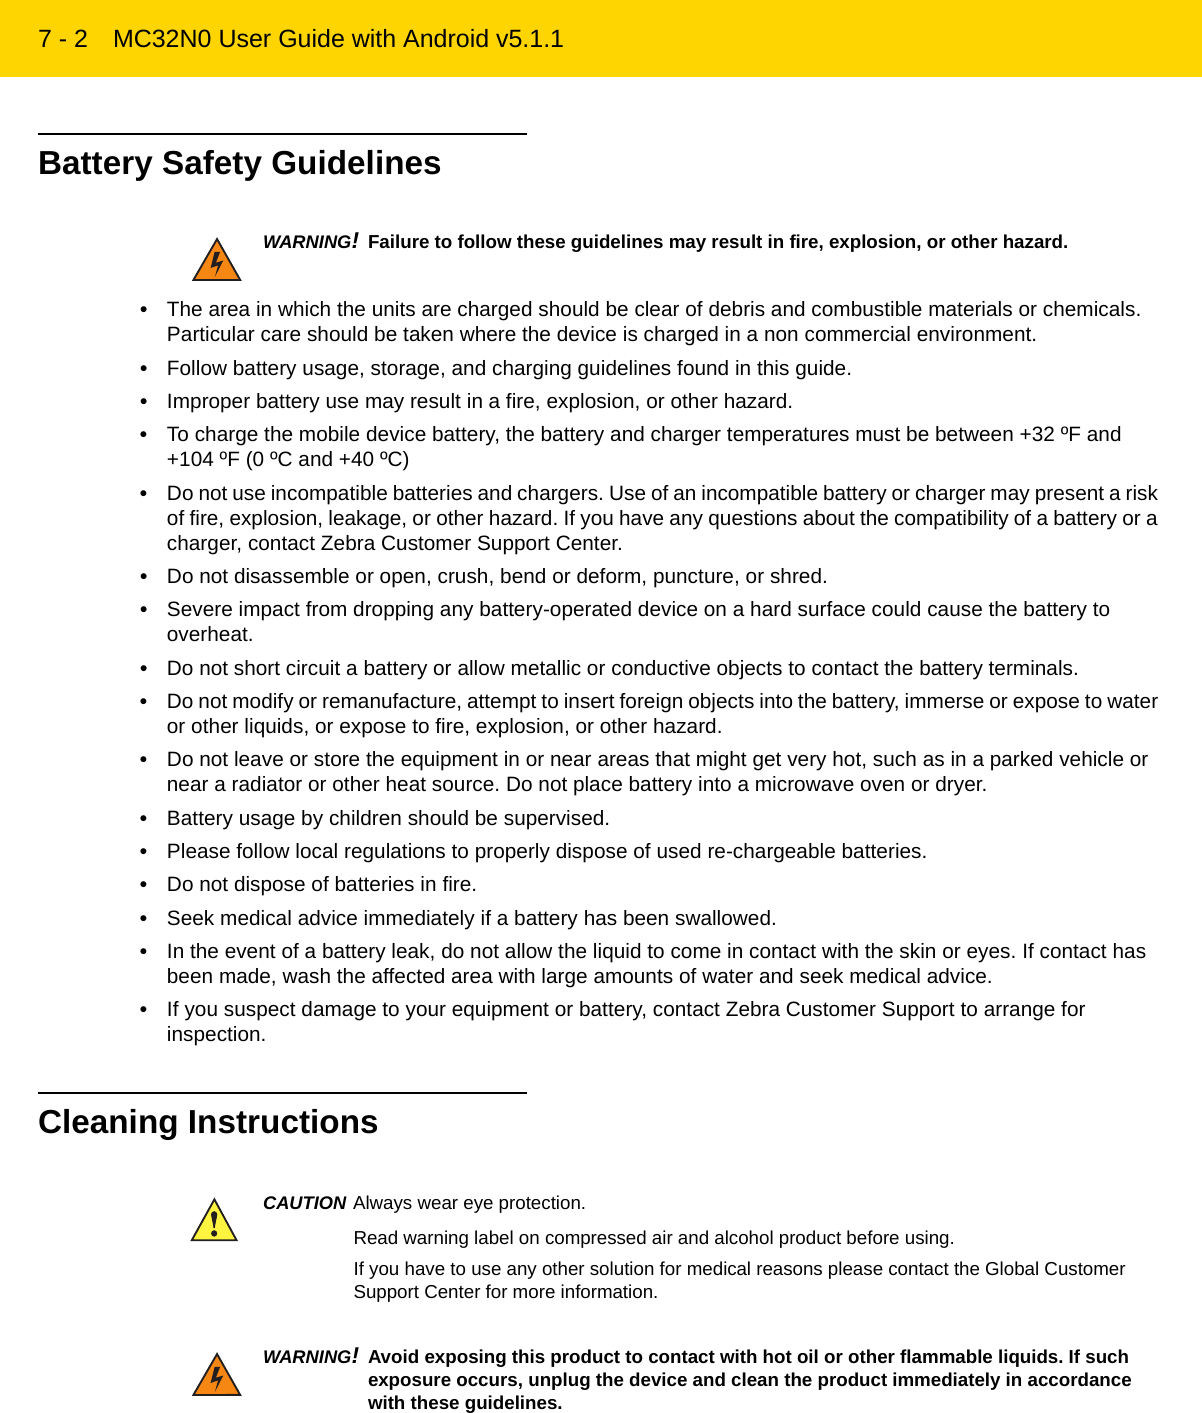 7 - 2 MC32N0 User Guide with Android v5.1.1Battery Safety Guidelines•The area in which the units are charged should be clear of debris and combustible materials or chemicals. Particular care should be taken where the device is charged in a non commercial environment.•Follow battery usage, storage, and charging guidelines found in this guide.•Improper battery use may result in a fire, explosion, or other hazard.•To charge the mobile device battery, the battery and charger temperatures must be between +32 ºF and +104 ºF (0 ºC and +40 ºC)•Do not use incompatible batteries and chargers. Use of an incompatible battery or charger may present a risk of fire, explosion, leakage, or other hazard. If you have any questions about the compatibility of a battery or a charger, contact Zebra Customer Support Center.•Do not disassemble or open, crush, bend or deform, puncture, or shred.•Severe impact from dropping any battery-operated device on a hard surface could cause the battery to overheat.•Do not short circuit a battery or allow metallic or conductive objects to contact the battery terminals.•Do not modify or remanufacture, attempt to insert foreign objects into the battery, immerse or expose to water or other liquids, or expose to fire, explosion, or other hazard.•Do not leave or store the equipment in or near areas that might get very hot, such as in a parked vehicle or near a radiator or other heat source. Do not place battery into a microwave oven or dryer.•Battery usage by children should be supervised.•Please follow local regulations to properly dispose of used re-chargeable batteries.•Do not dispose of batteries in fire.•Seek medical advice immediately if a battery has been swallowed.•In the event of a battery leak, do not allow the liquid to come in contact with the skin or eyes. If contact has been made, wash the affected area with large amounts of water and seek medical advice.•If you suspect damage to your equipment or battery, contact Zebra Customer Support to arrange for inspection.Cleaning InstructionsWARNING!Failure to follow these guidelines may result in fire, explosion, or other hazard.CAUTION Always wear eye protection.Read warning label on compressed air and alcohol product before using.If you have to use any other solution for medical reasons please contact the Global Customer Support Center for more information.WARNING!Avoid exposing this product to contact with hot oil or other flammable liquids. If such exposure occurs, unplug the device and clean the product immediately in accordance with these guidelines.REVIEW ONLY - REVIEW ONLY - REVIEW ONLY                             REVIEW ONLY - REVIEW ONLY - REVIEW ONLY